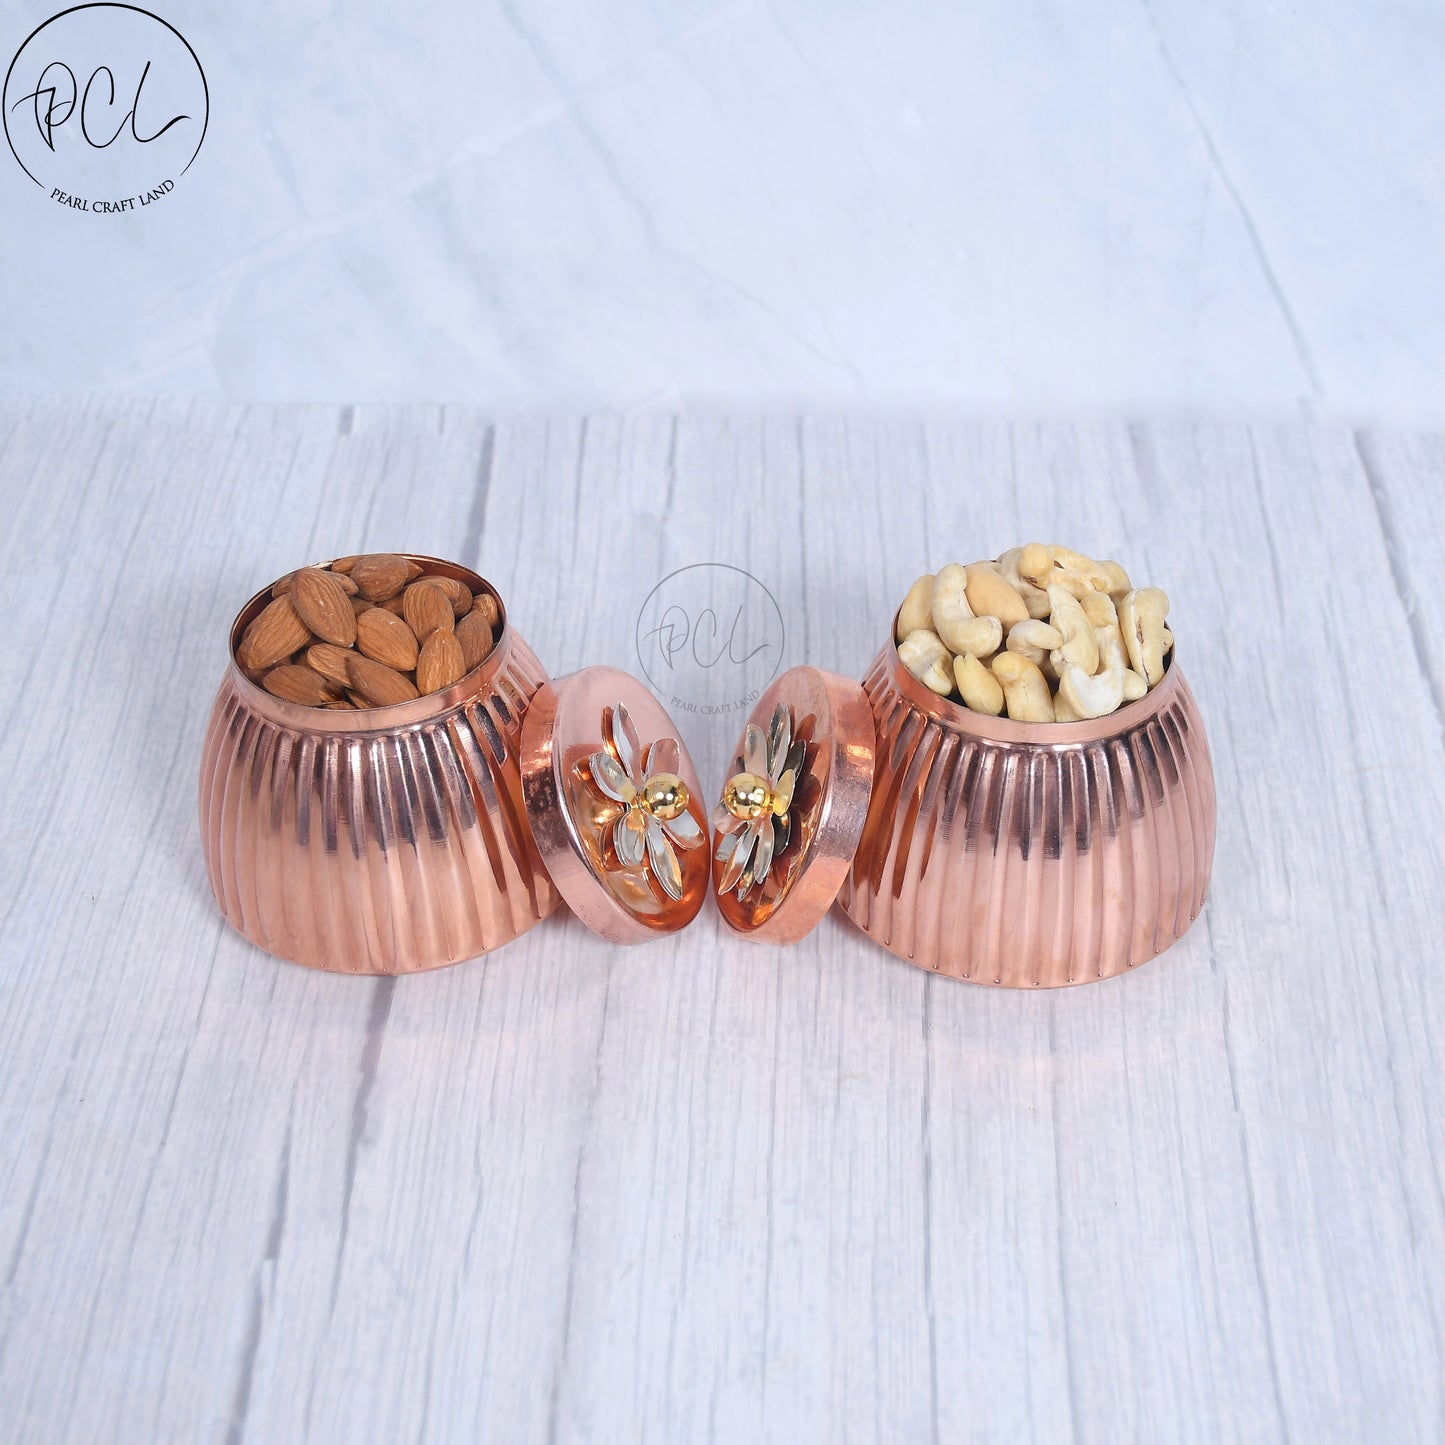 Exclusive Copper Rope Design Dry-Fruit Pot with Gifting Box Set of 2